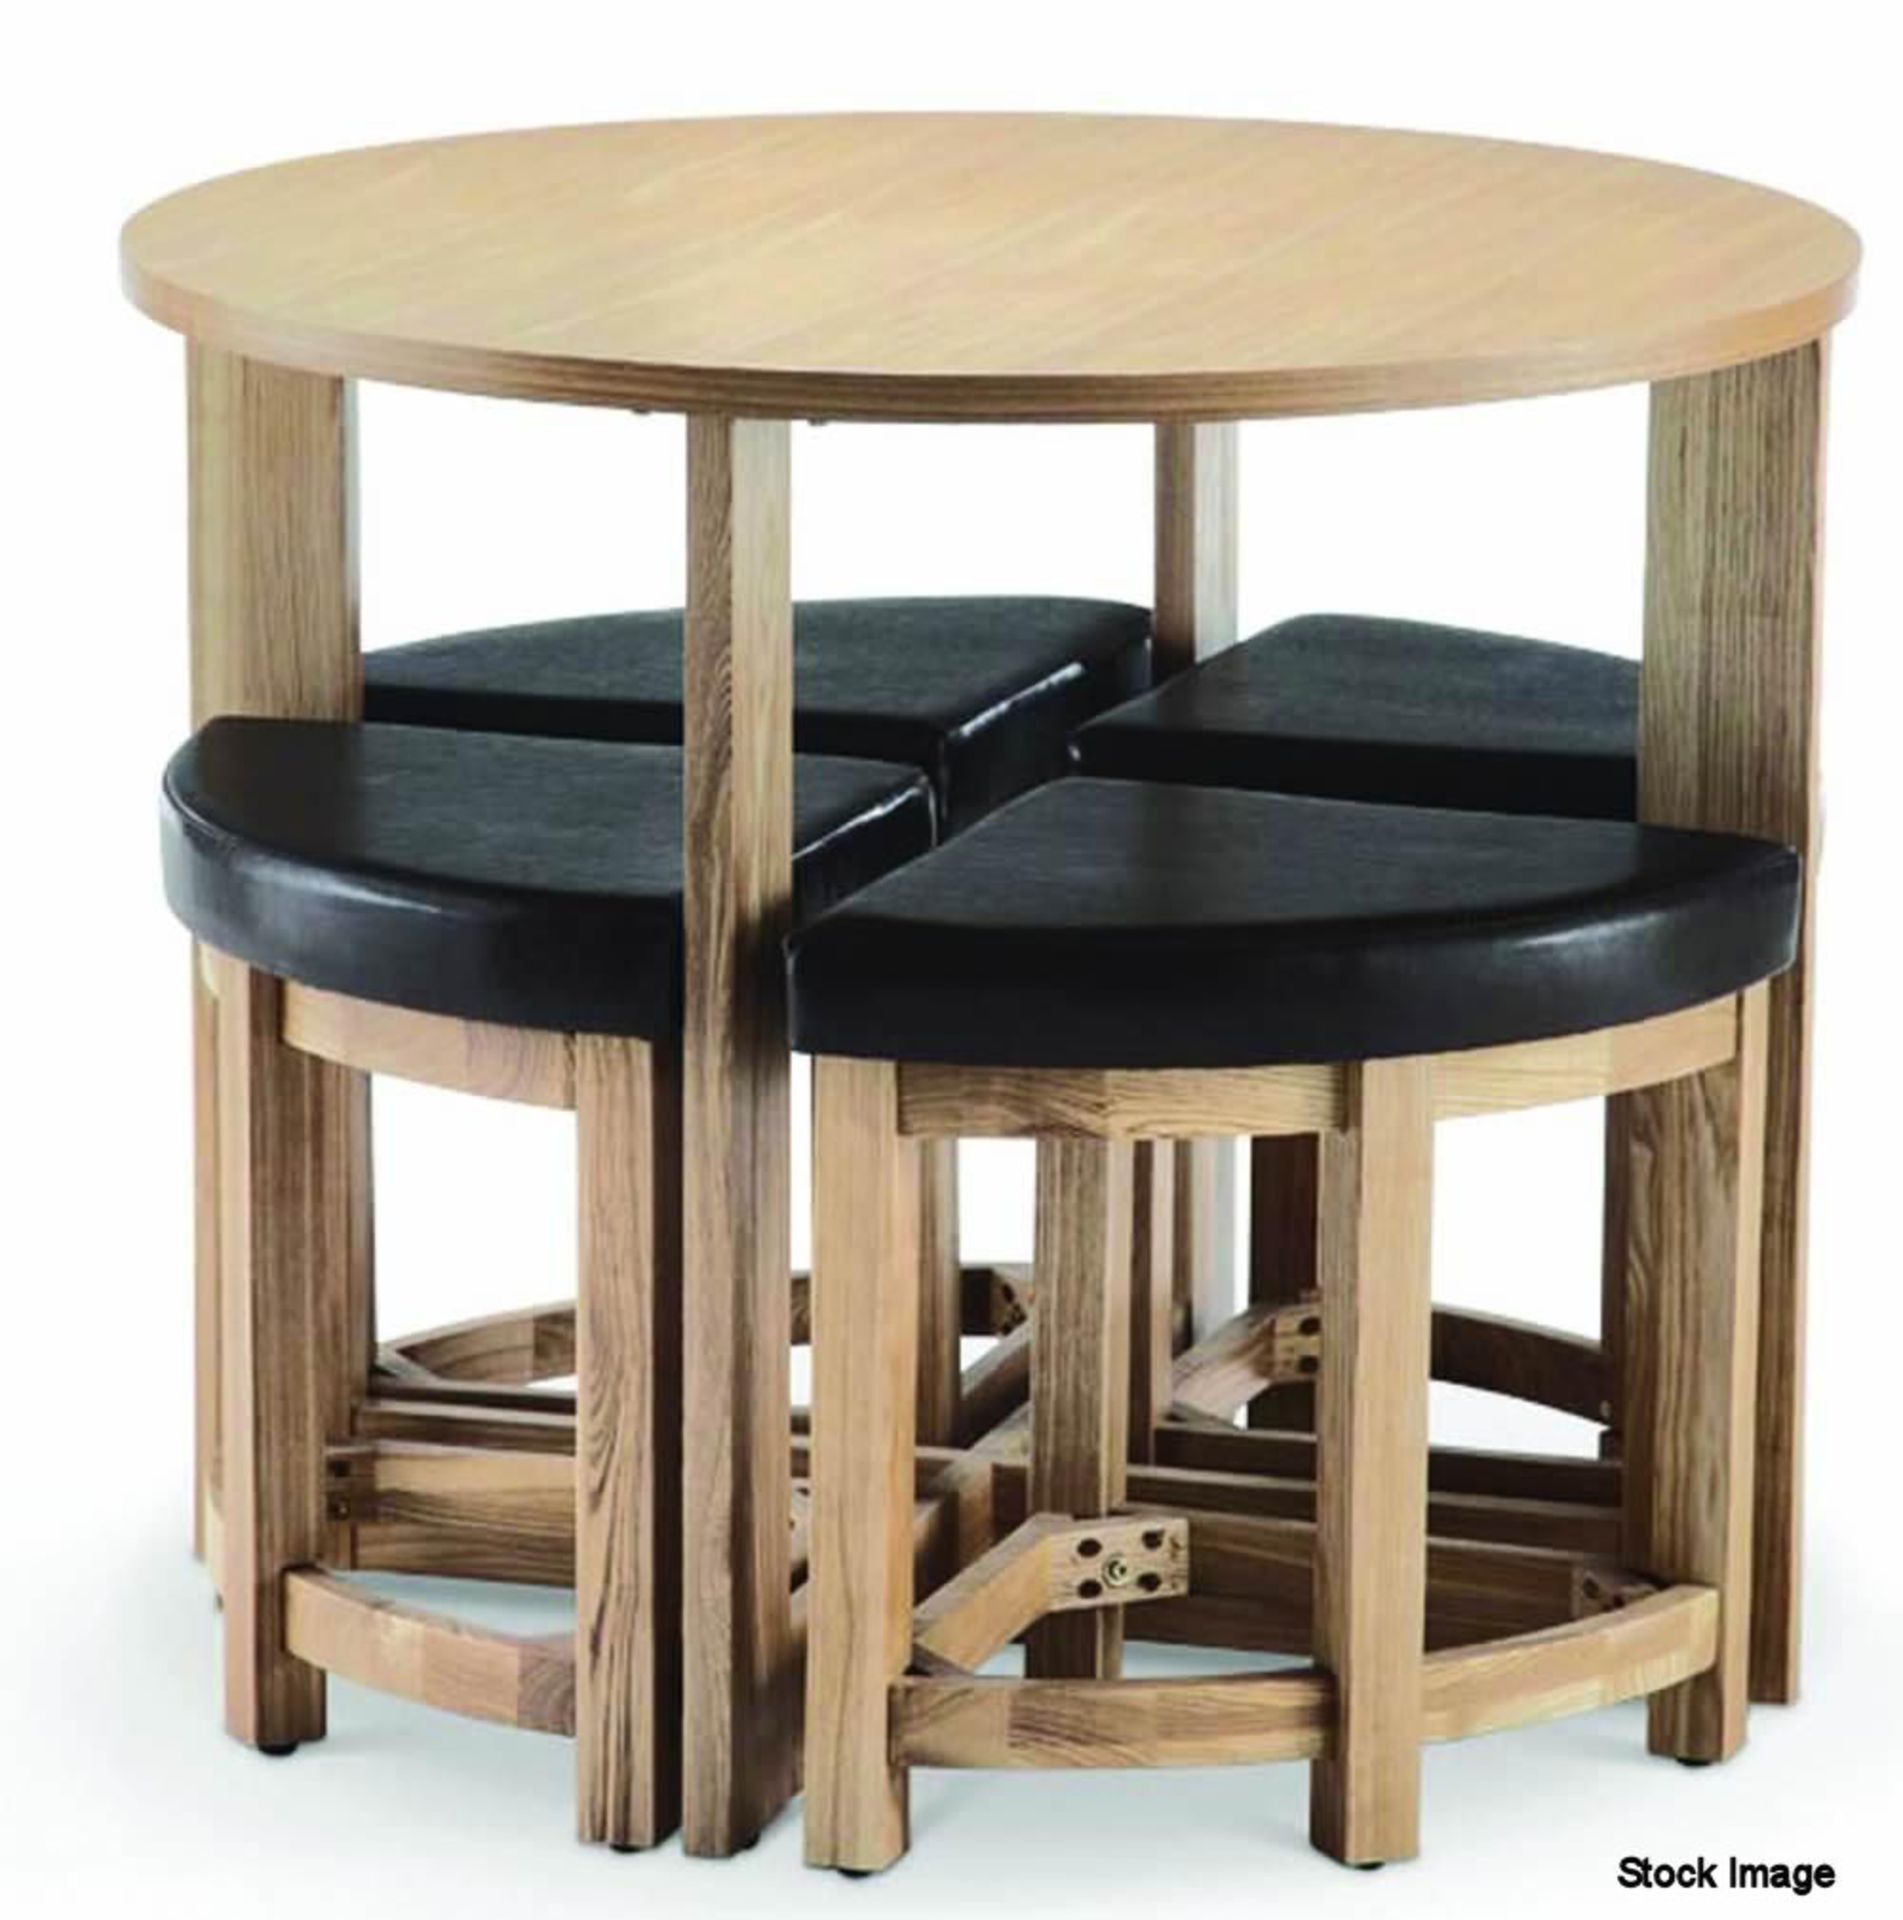 Oak Ash Veneer Stowaway Dining Table with 4 Brown Faux Leather Padded Stools - CL185 - Ref:OakSW - L - Image 2 of 9